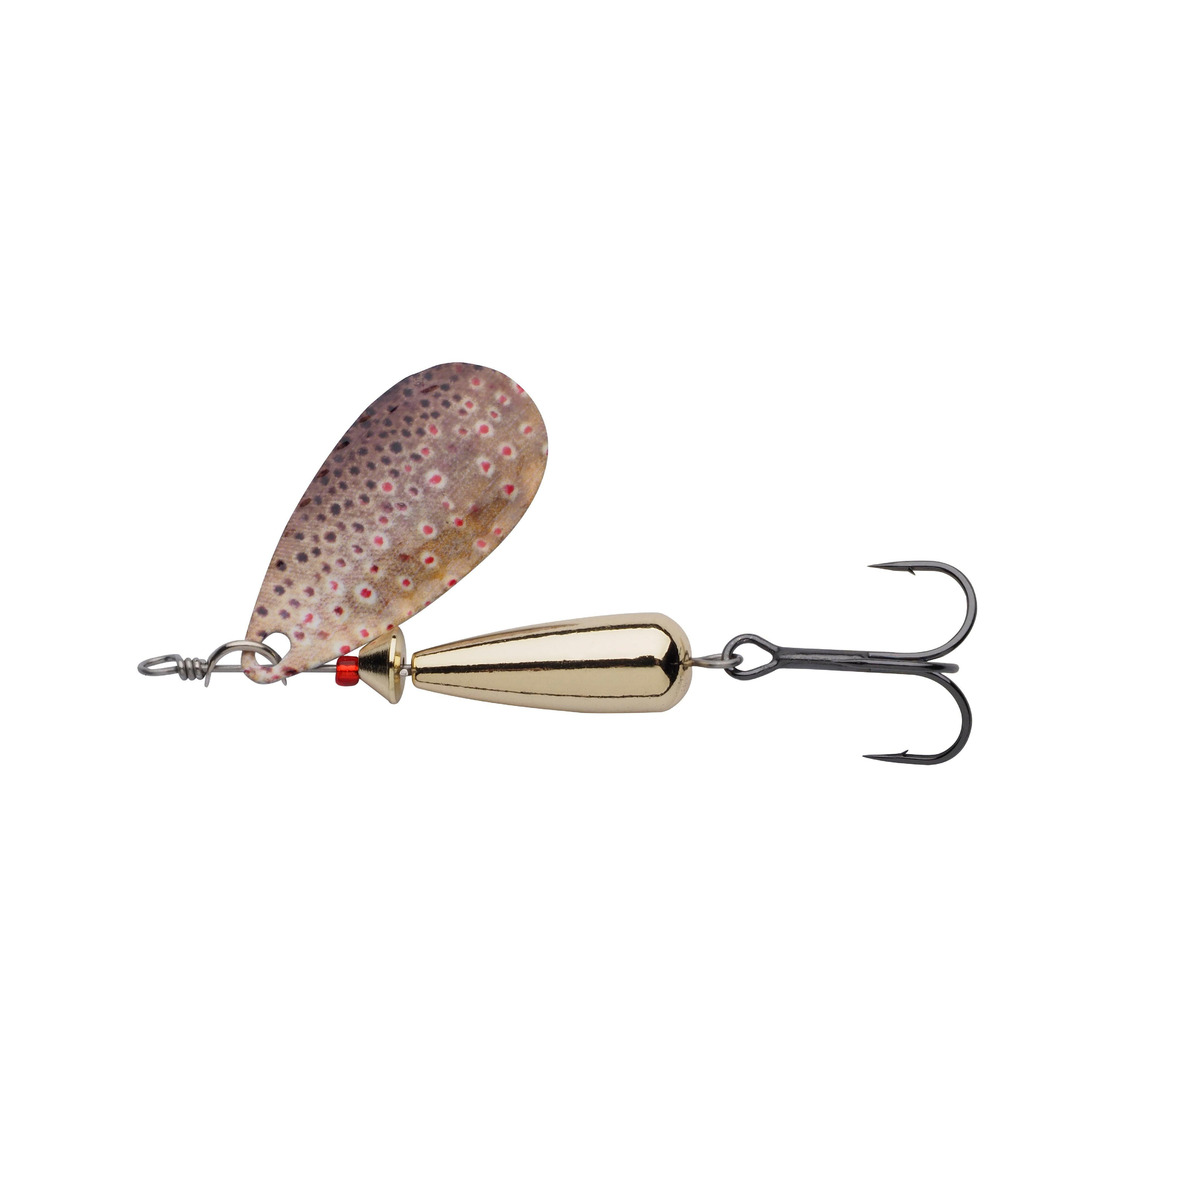 Abu Garcia Droppen Spinners 4 G - Brown Trout - 40 mm